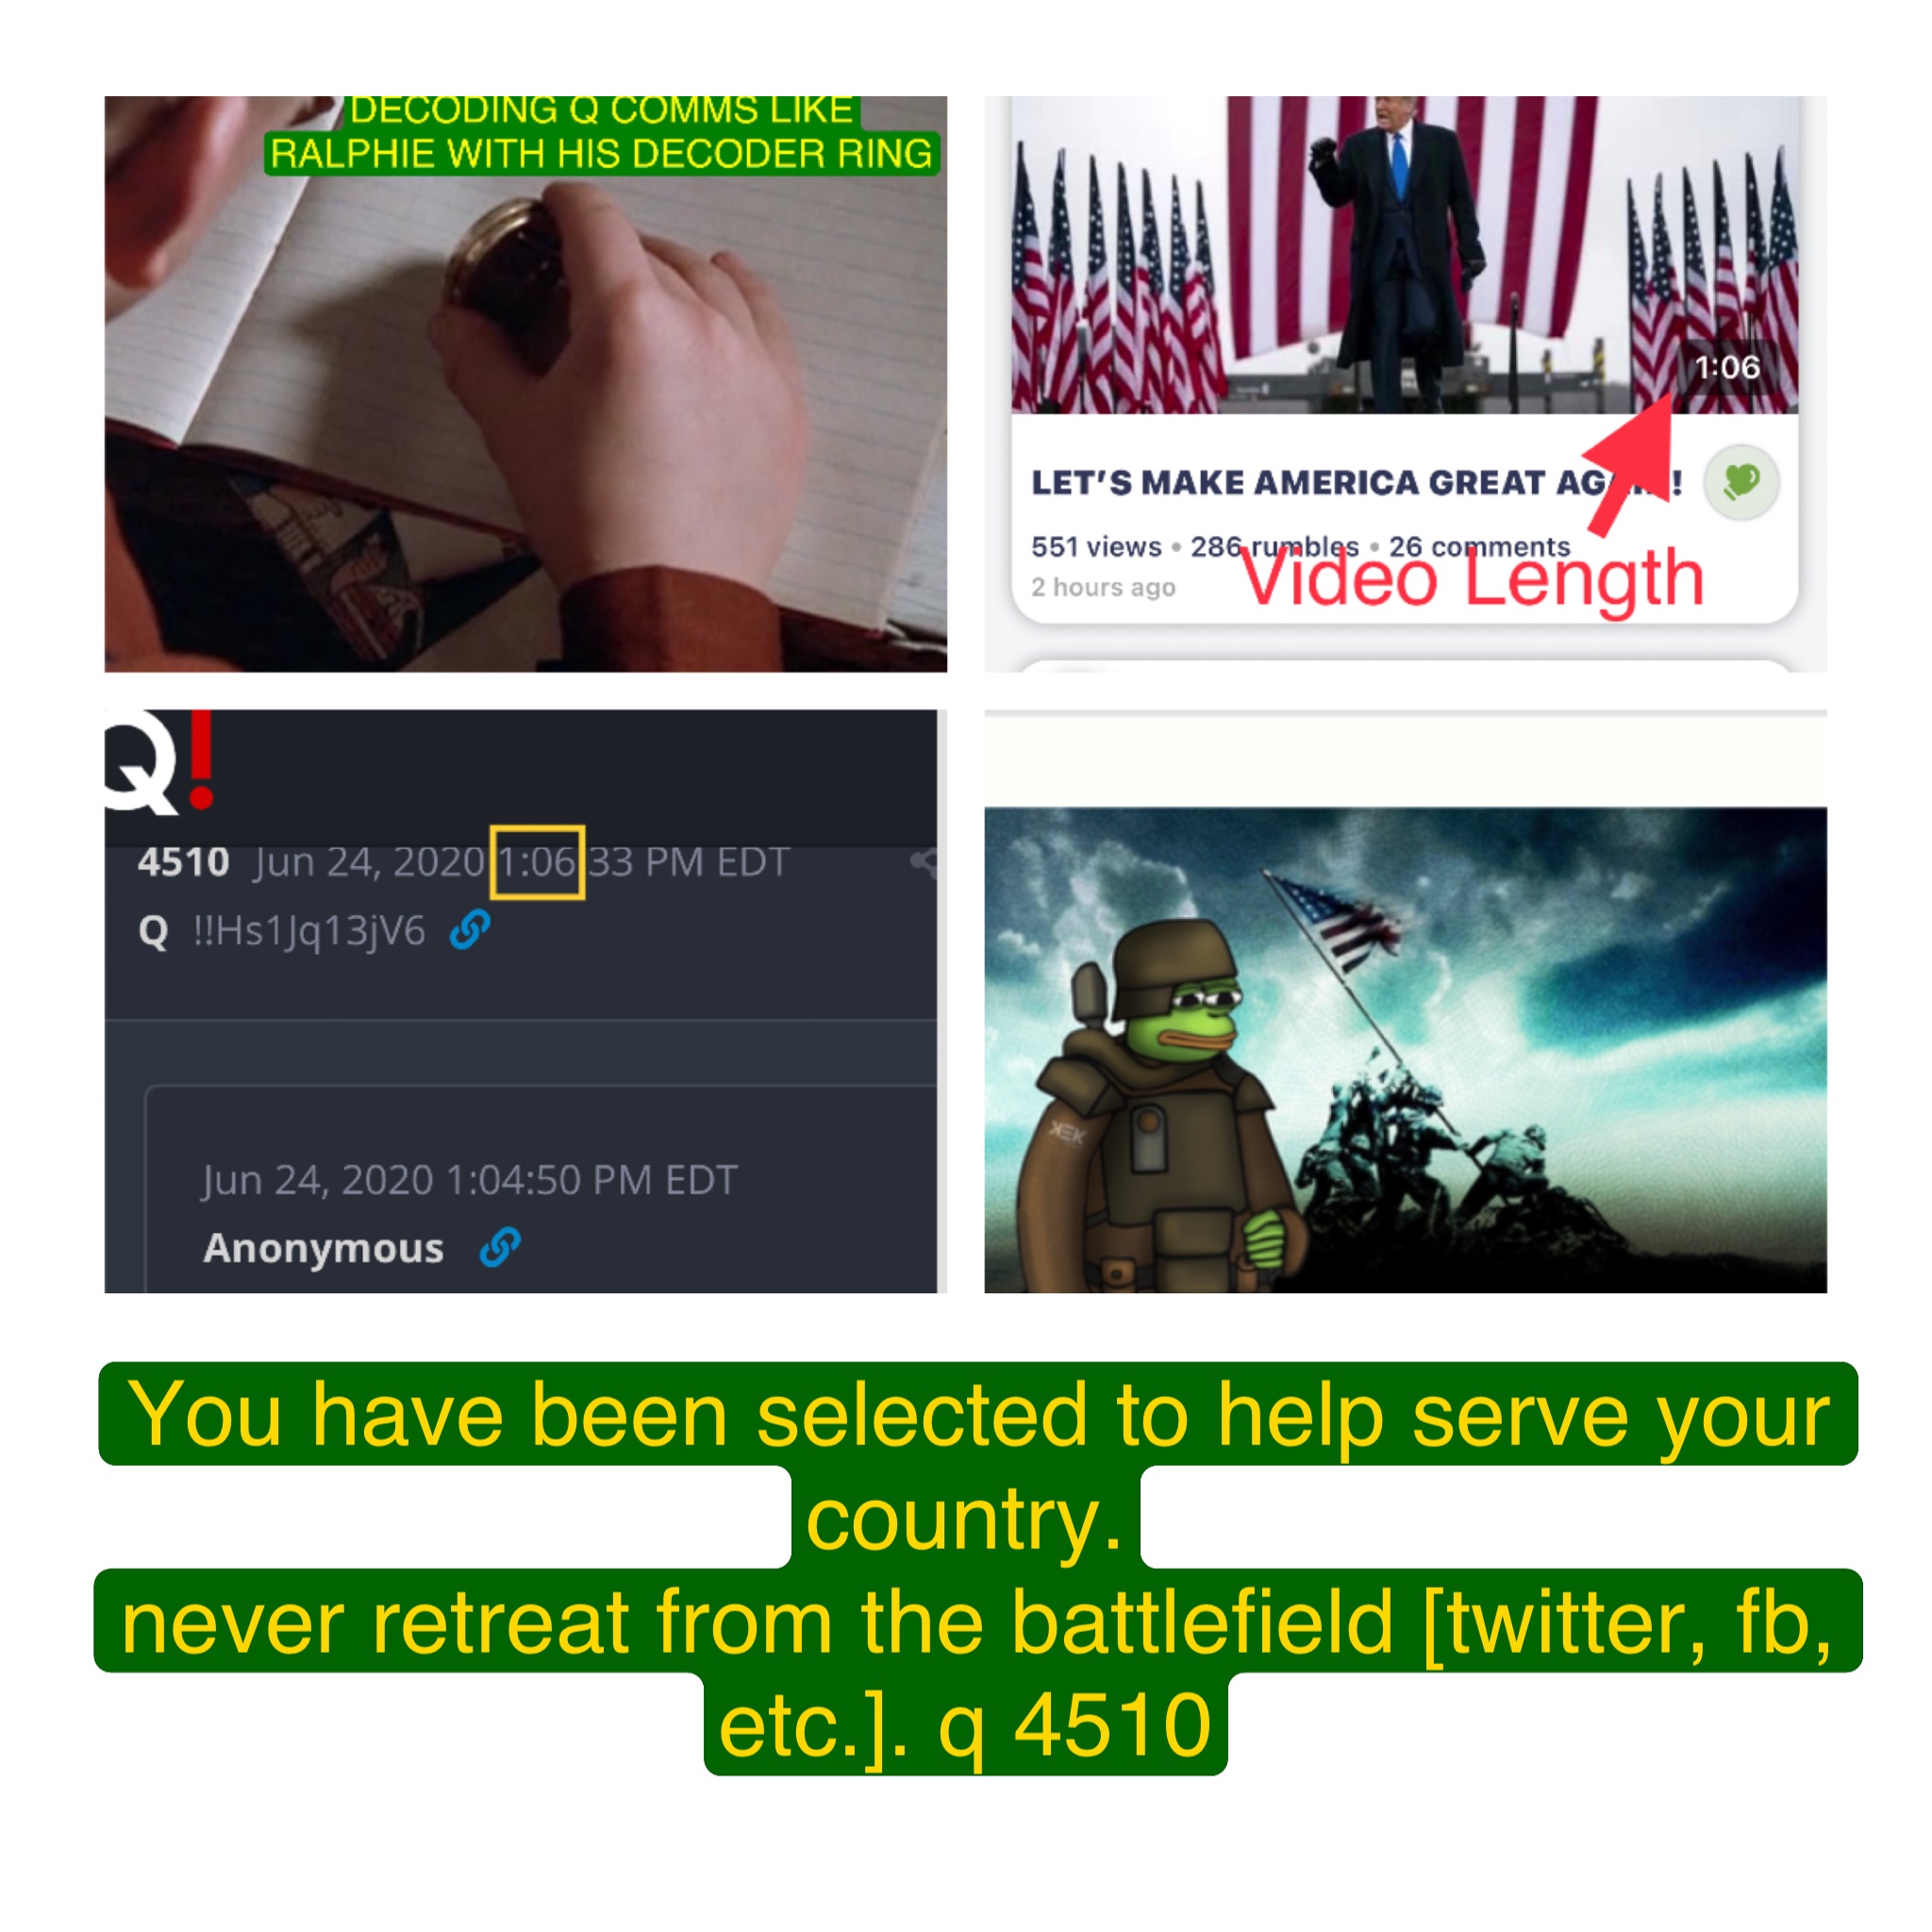 how can you help your country